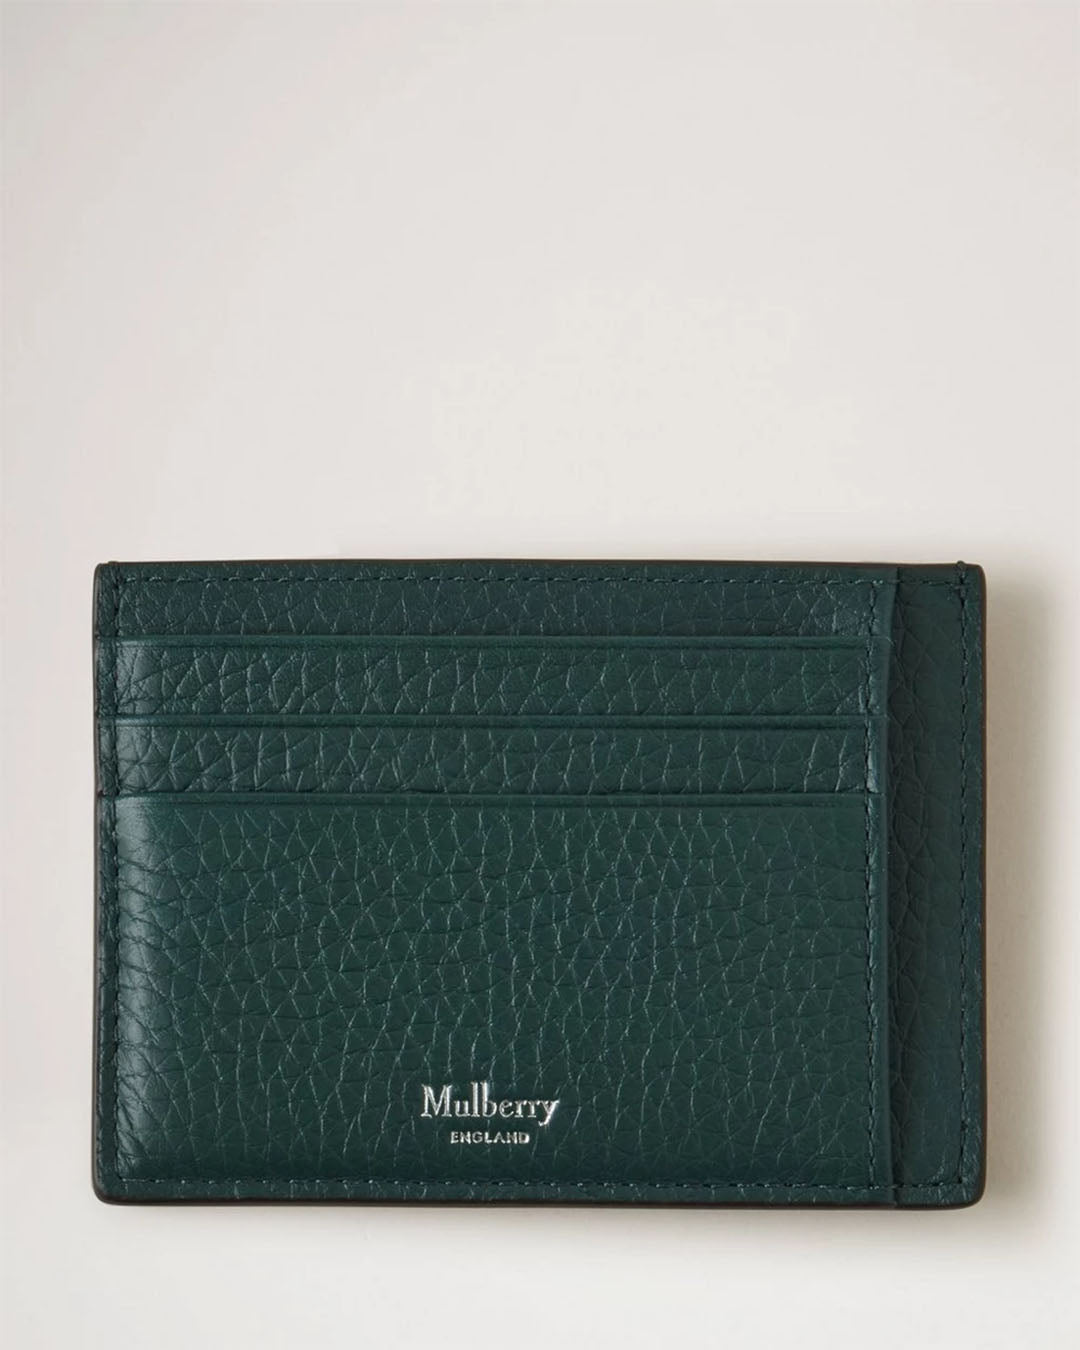 Mulberry Heritage Card Holder